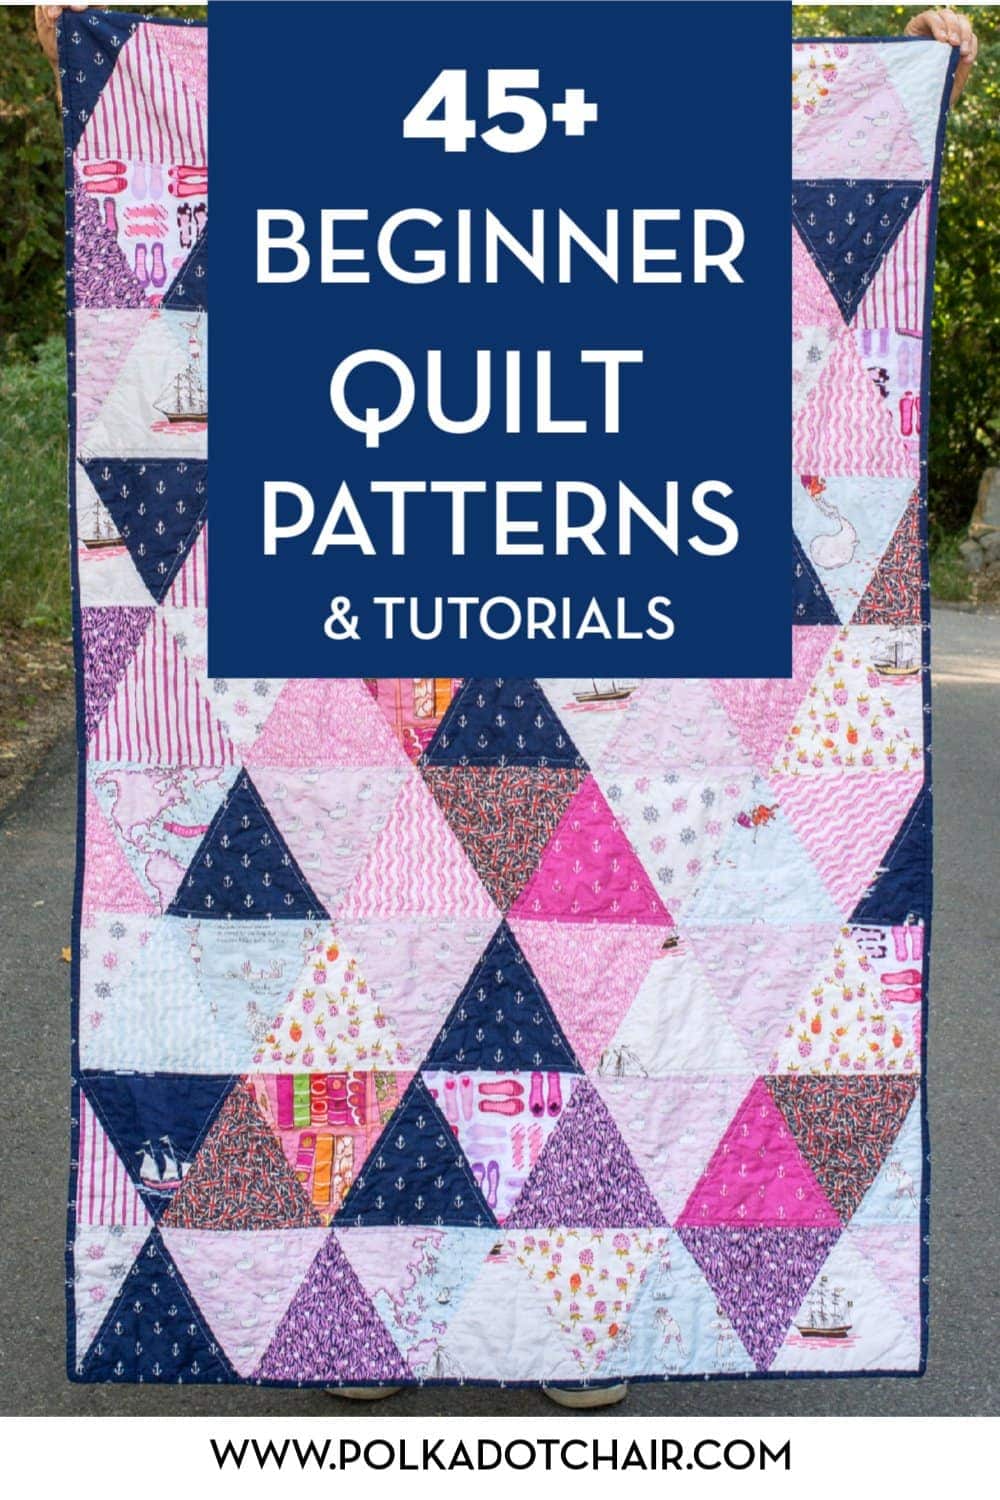 Doing patchwork patterns